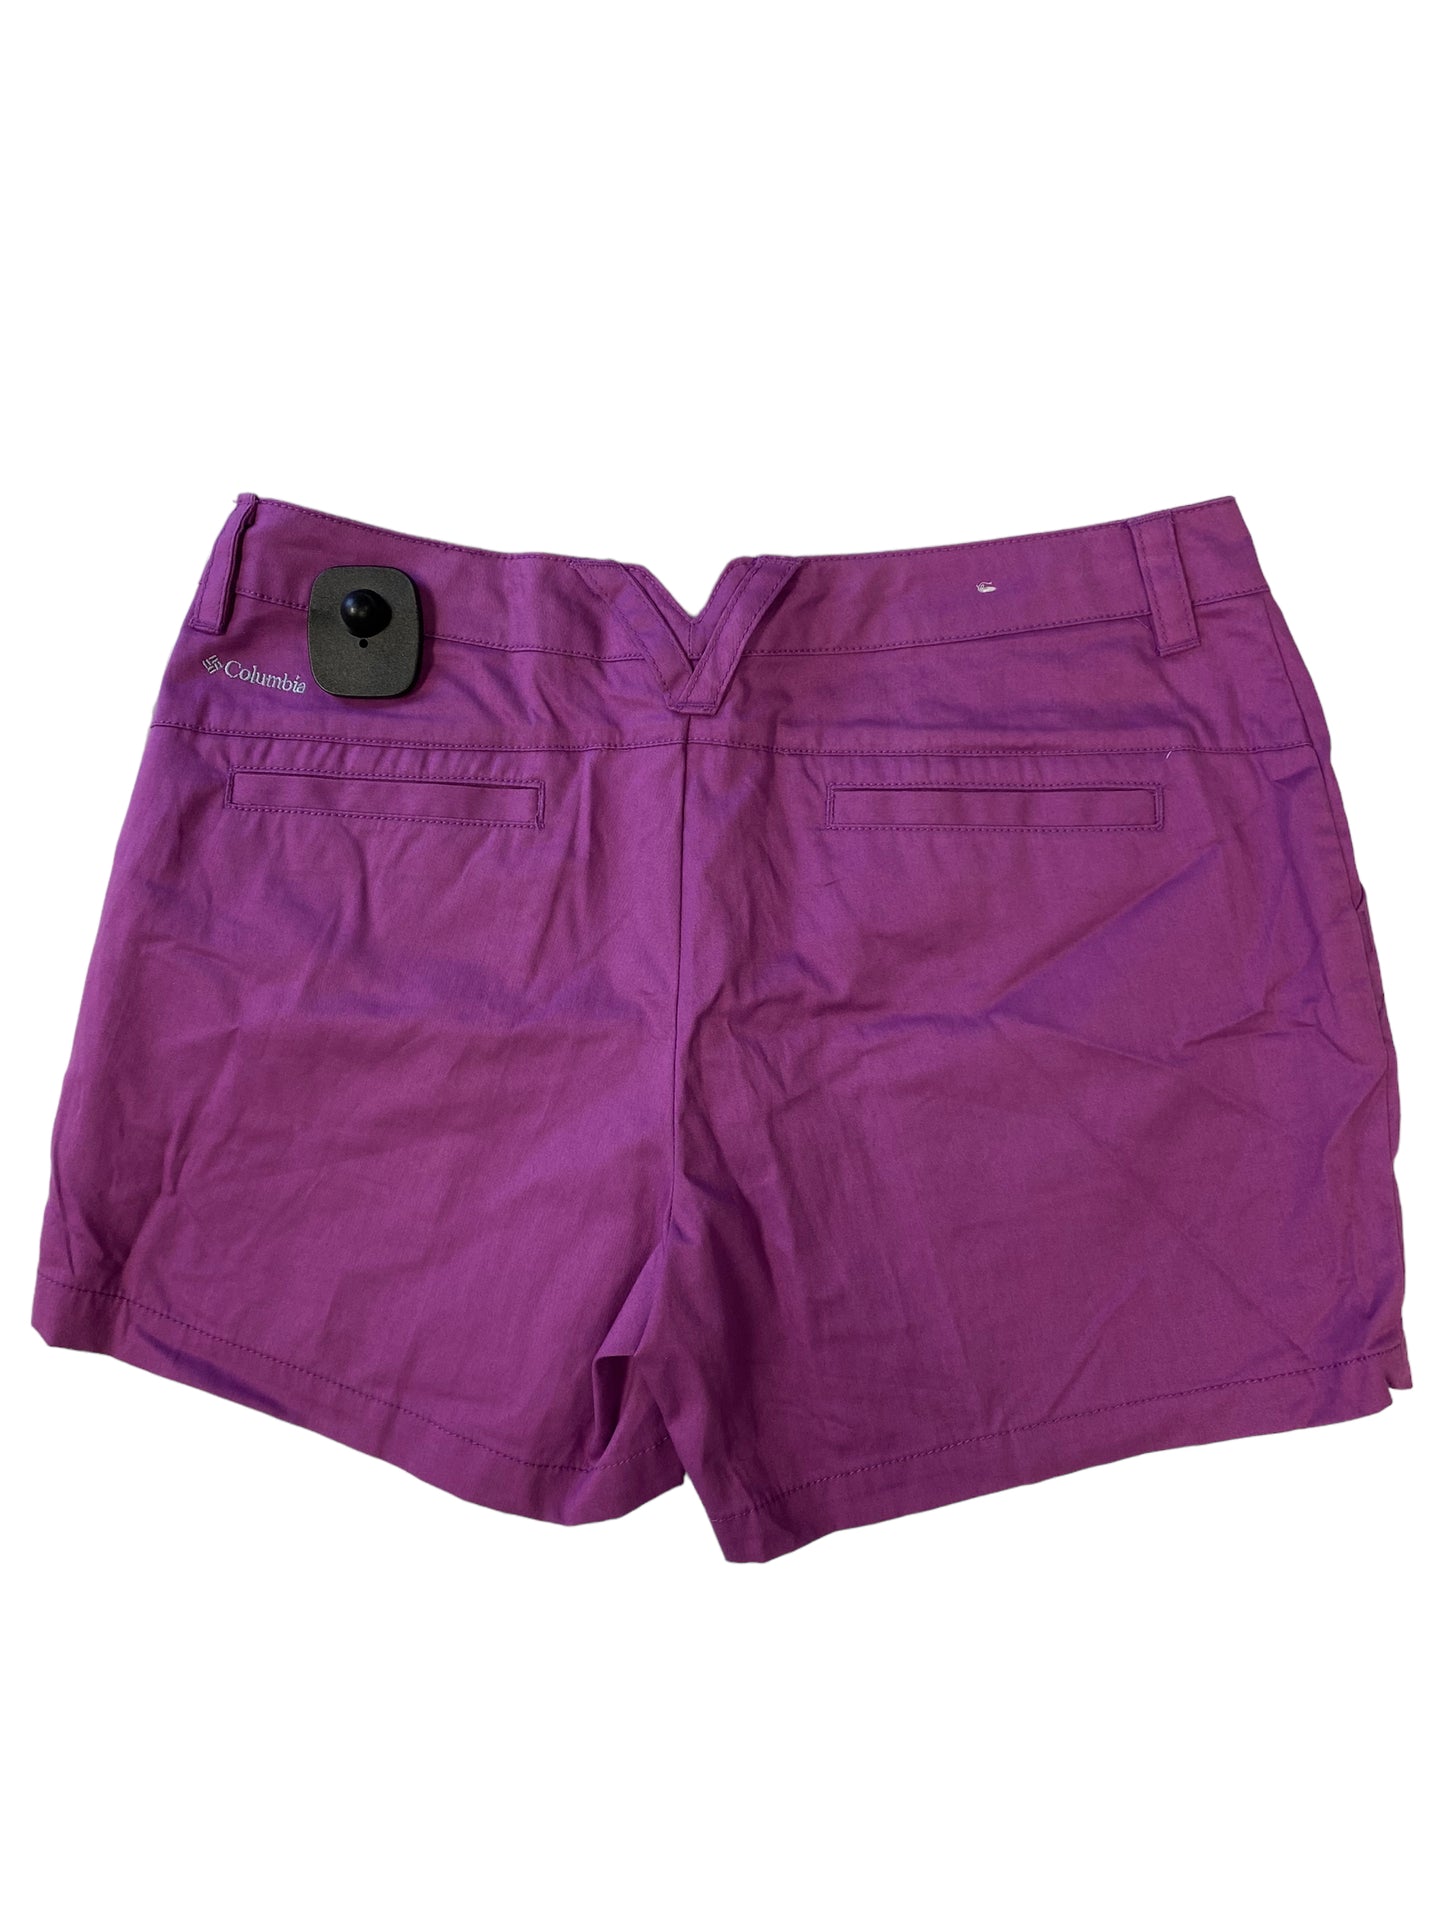 Athletic Shorts By Columbia  Size: 4